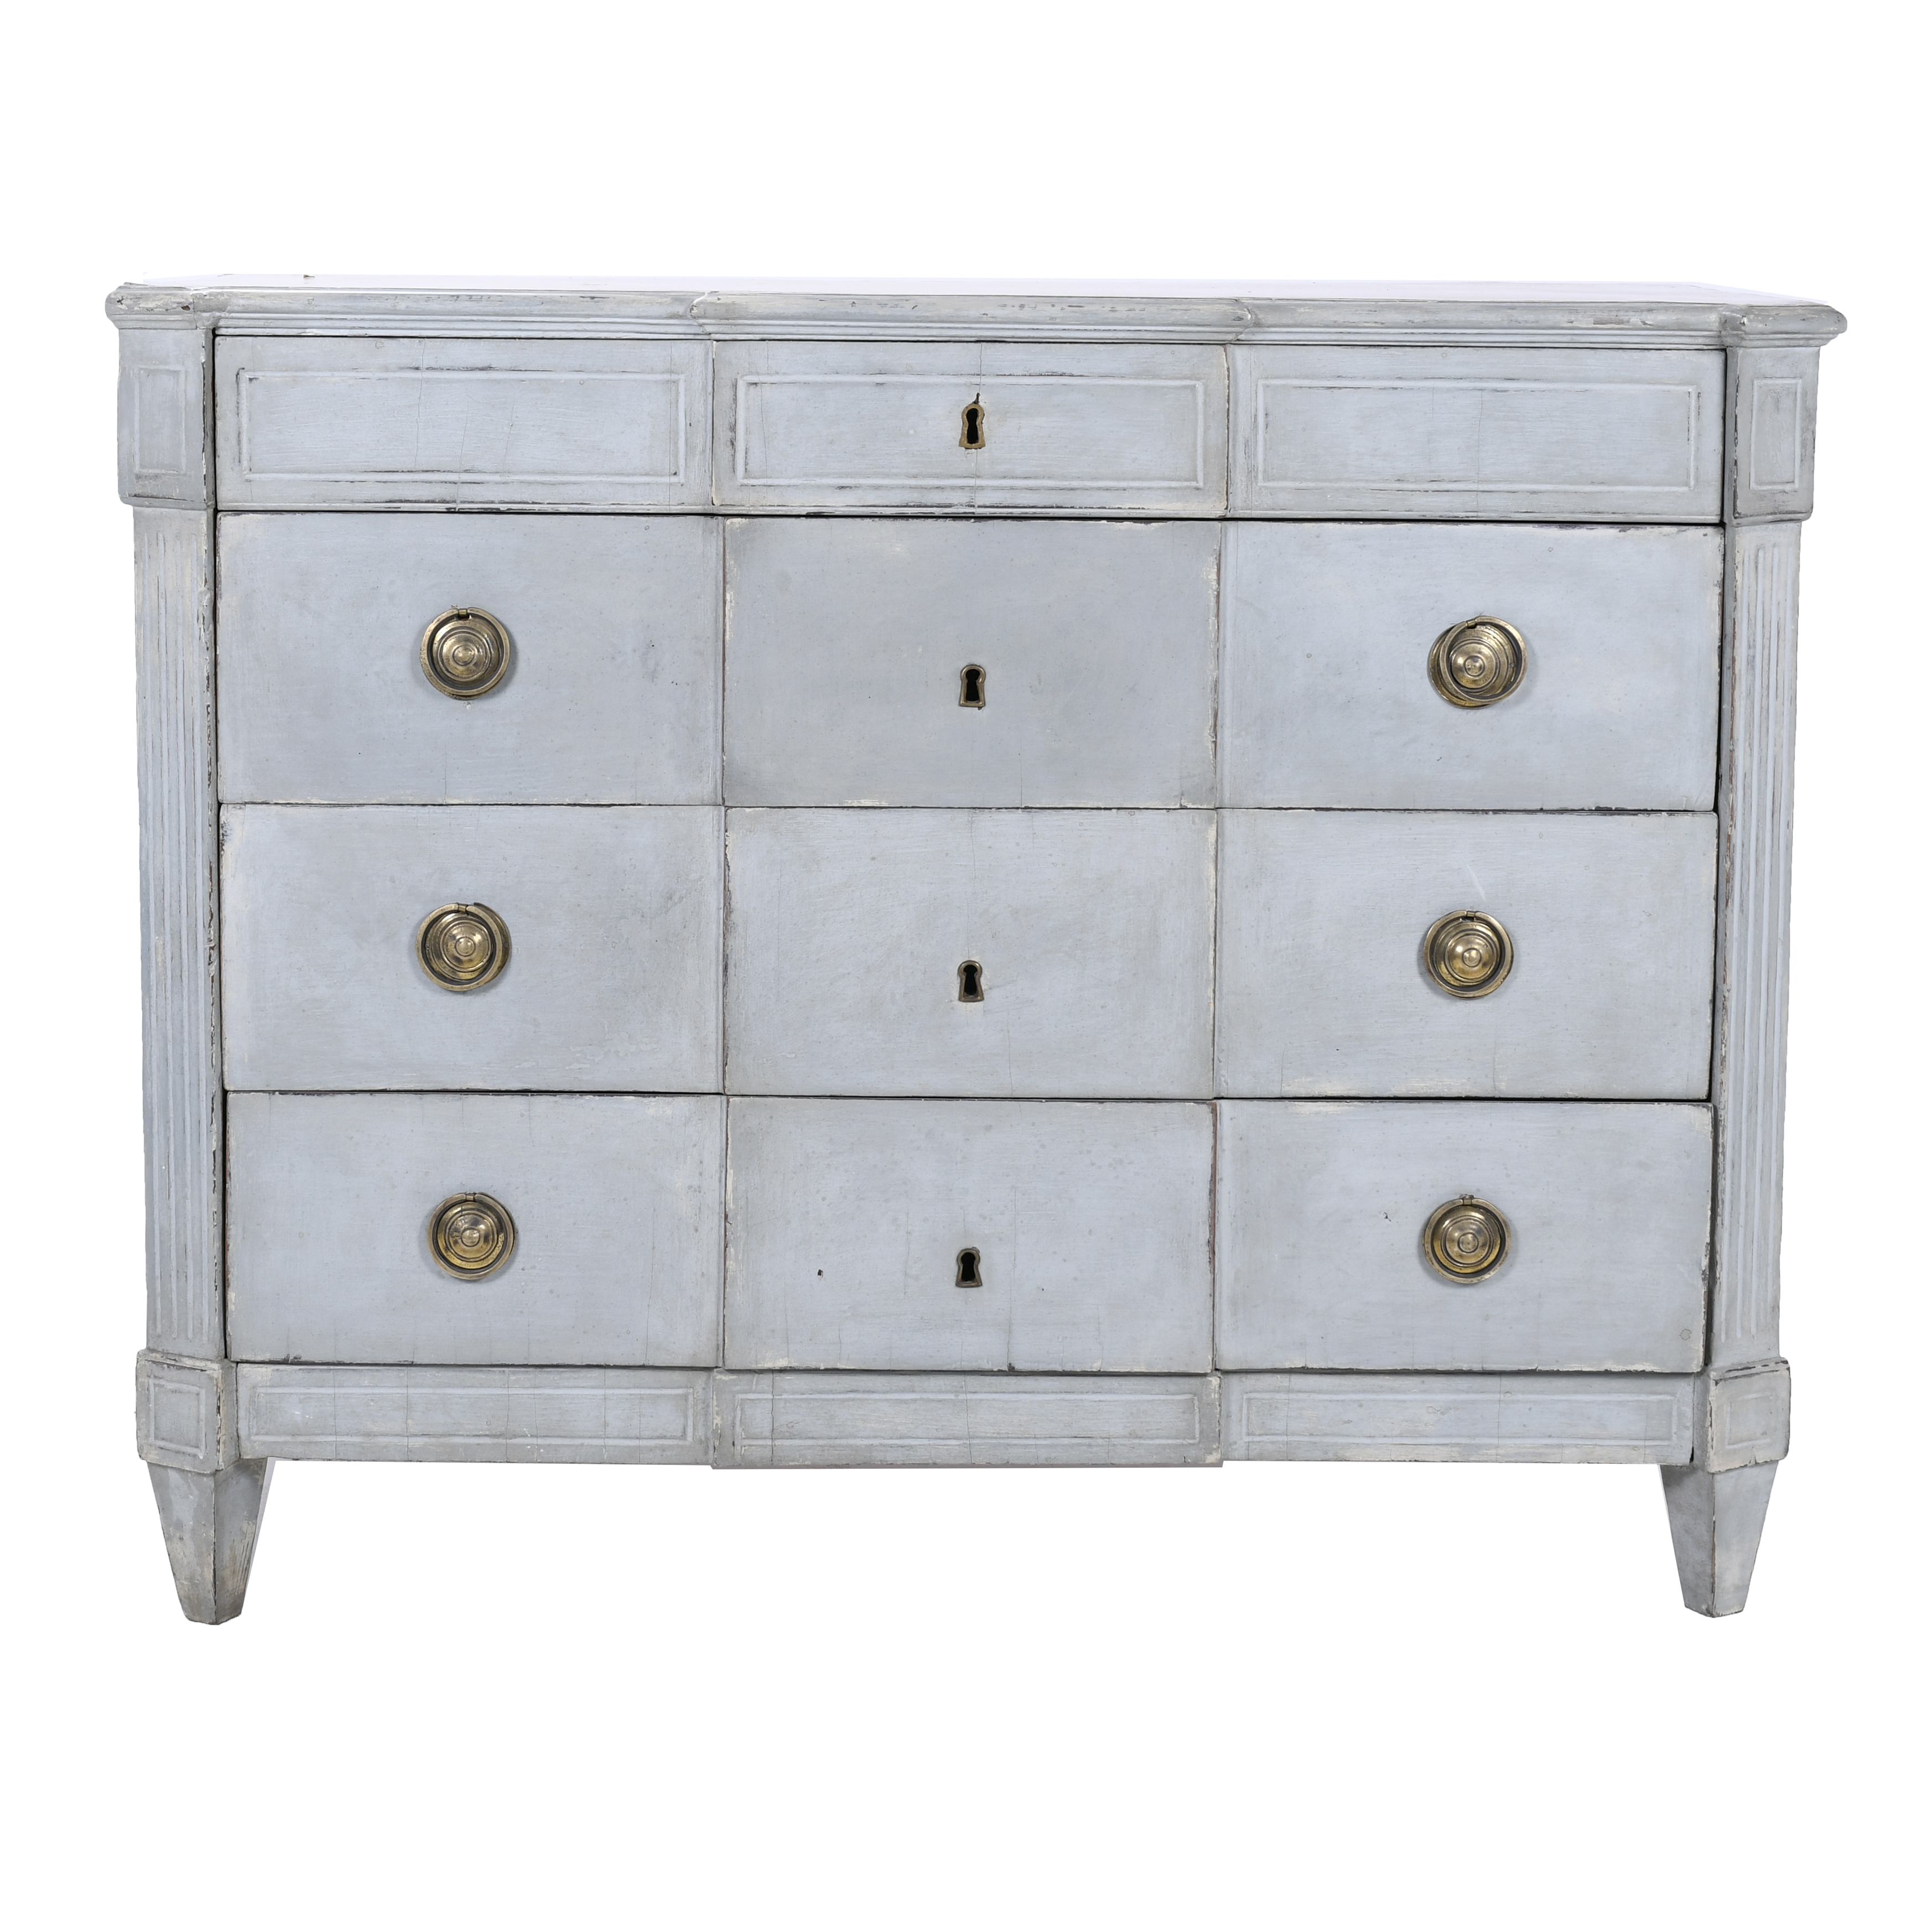 FRENCH NEOCLASSICAL-STYLE CHEST OF DRAWERS, 20TH CENTURY.